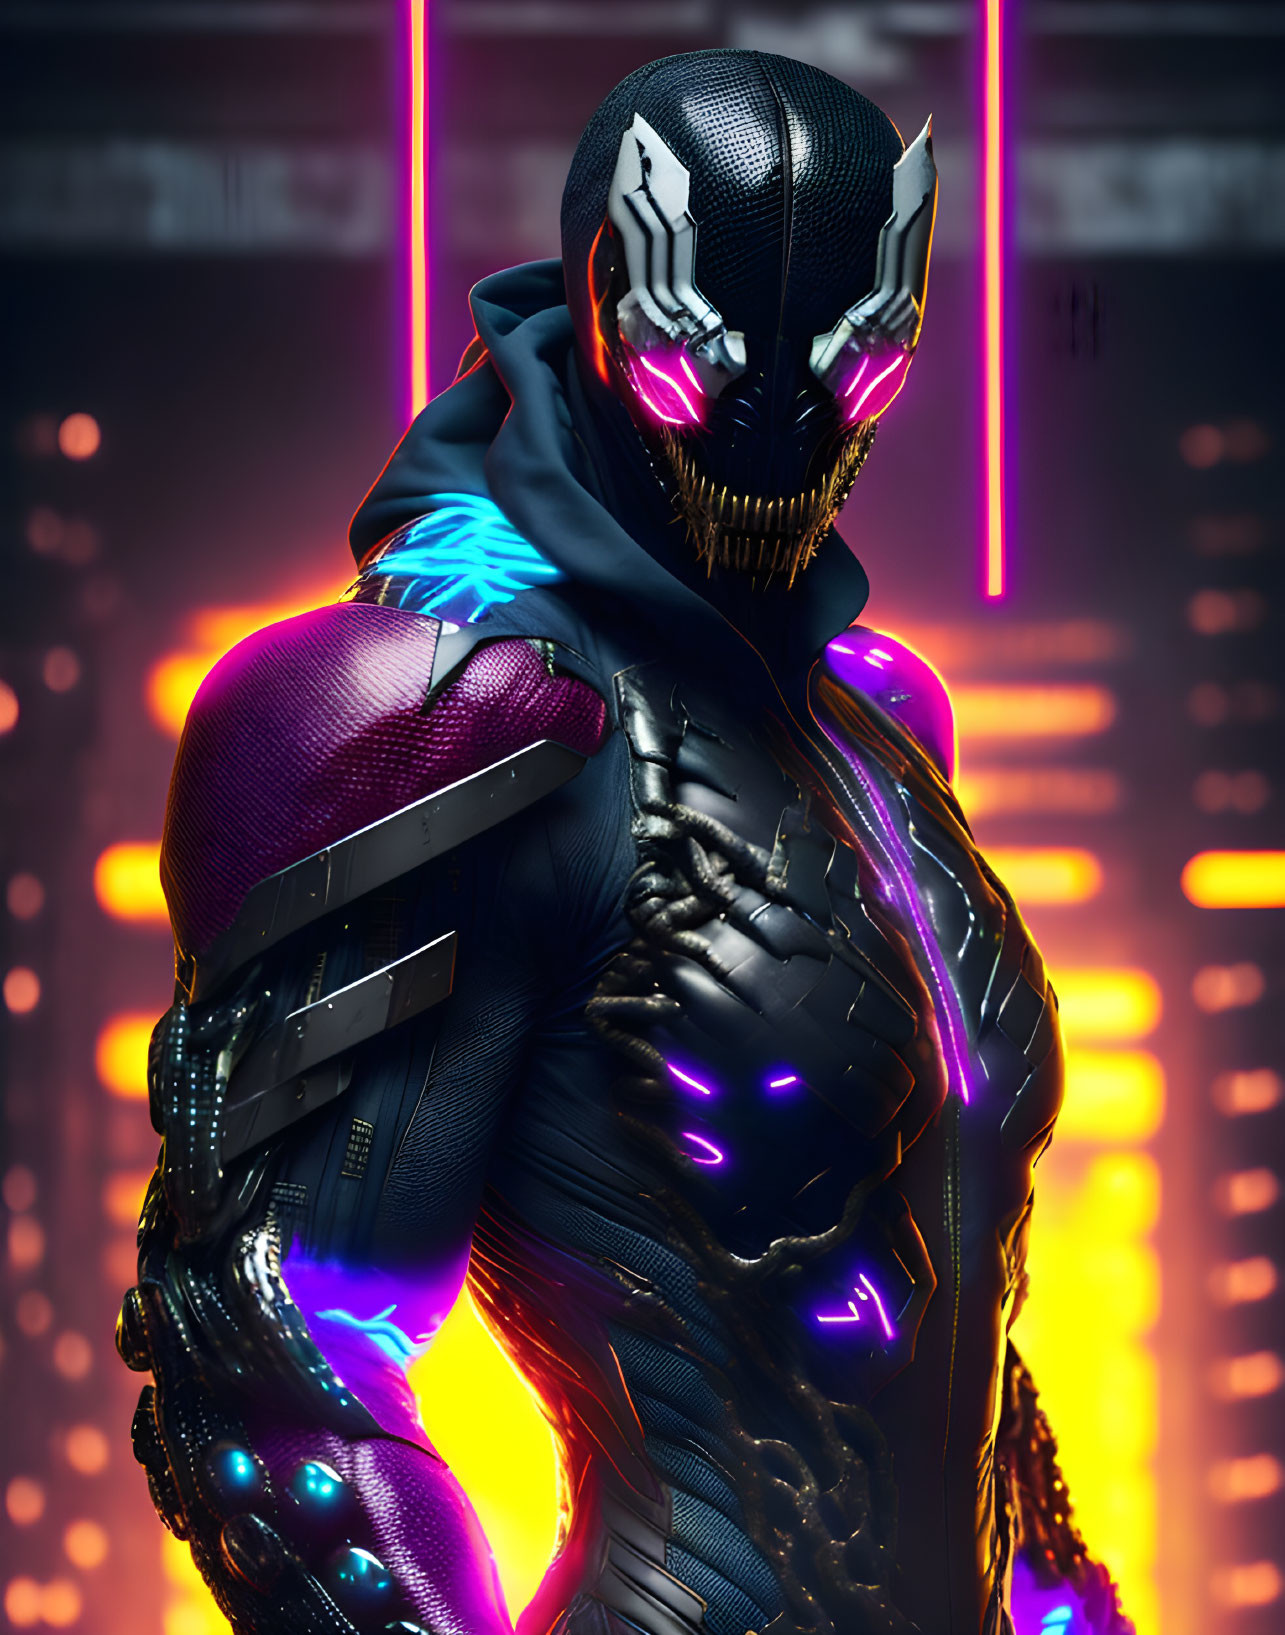 Futuristic warrior with glowing mask and armor in neon-lit setting